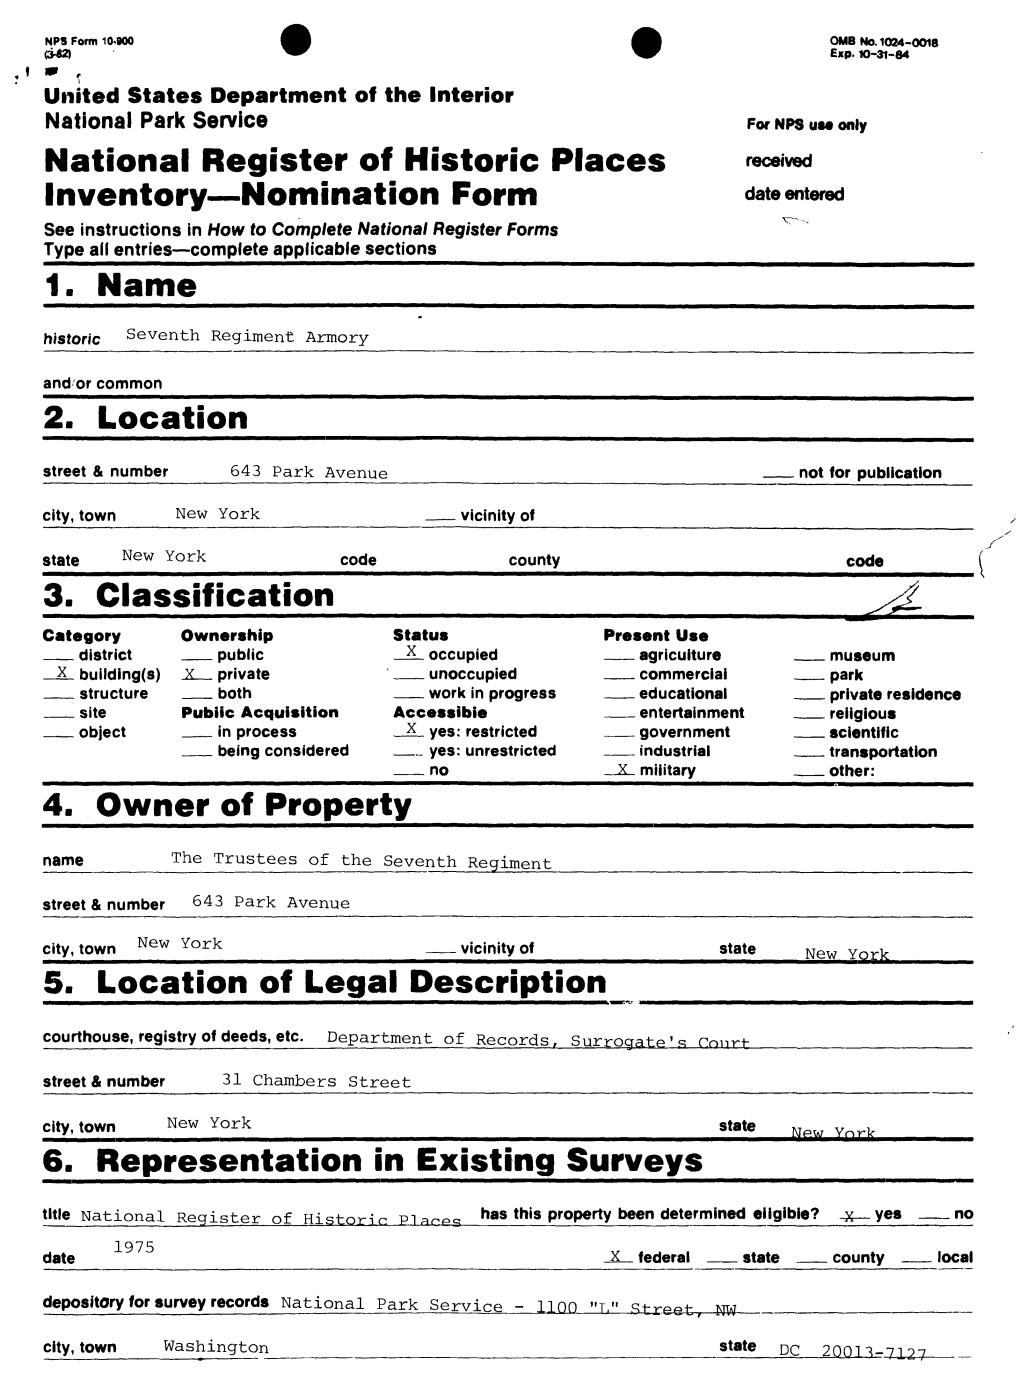 National Register of Historic Places Inventory Nomination Form Date